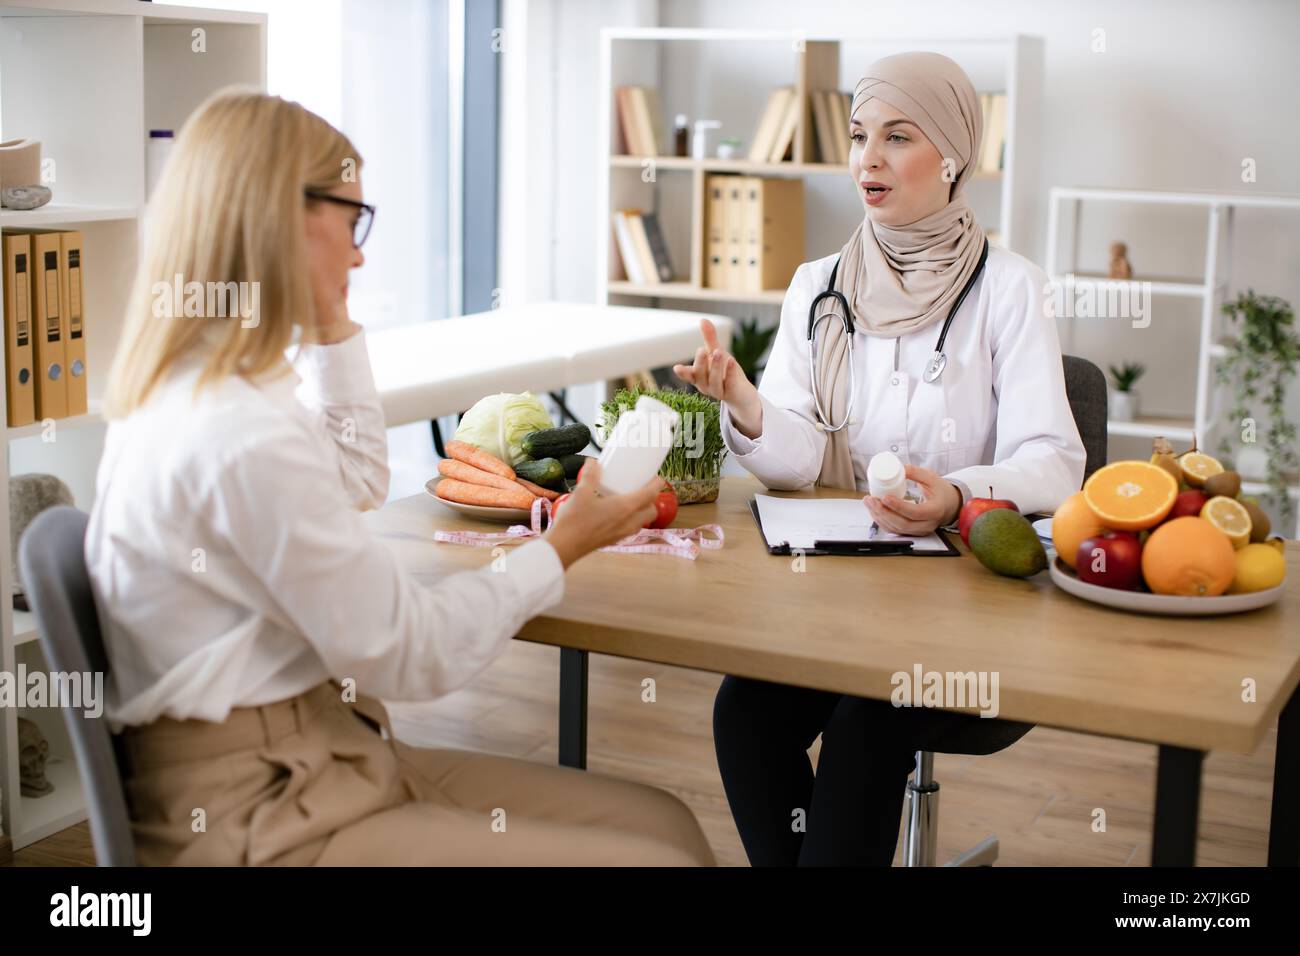 Muslim woman nutritionist makes plan for treatment of gastrointestinal tract using vitamins and supplements for healthy diet. Mature Caucasian lady re Stock Photo